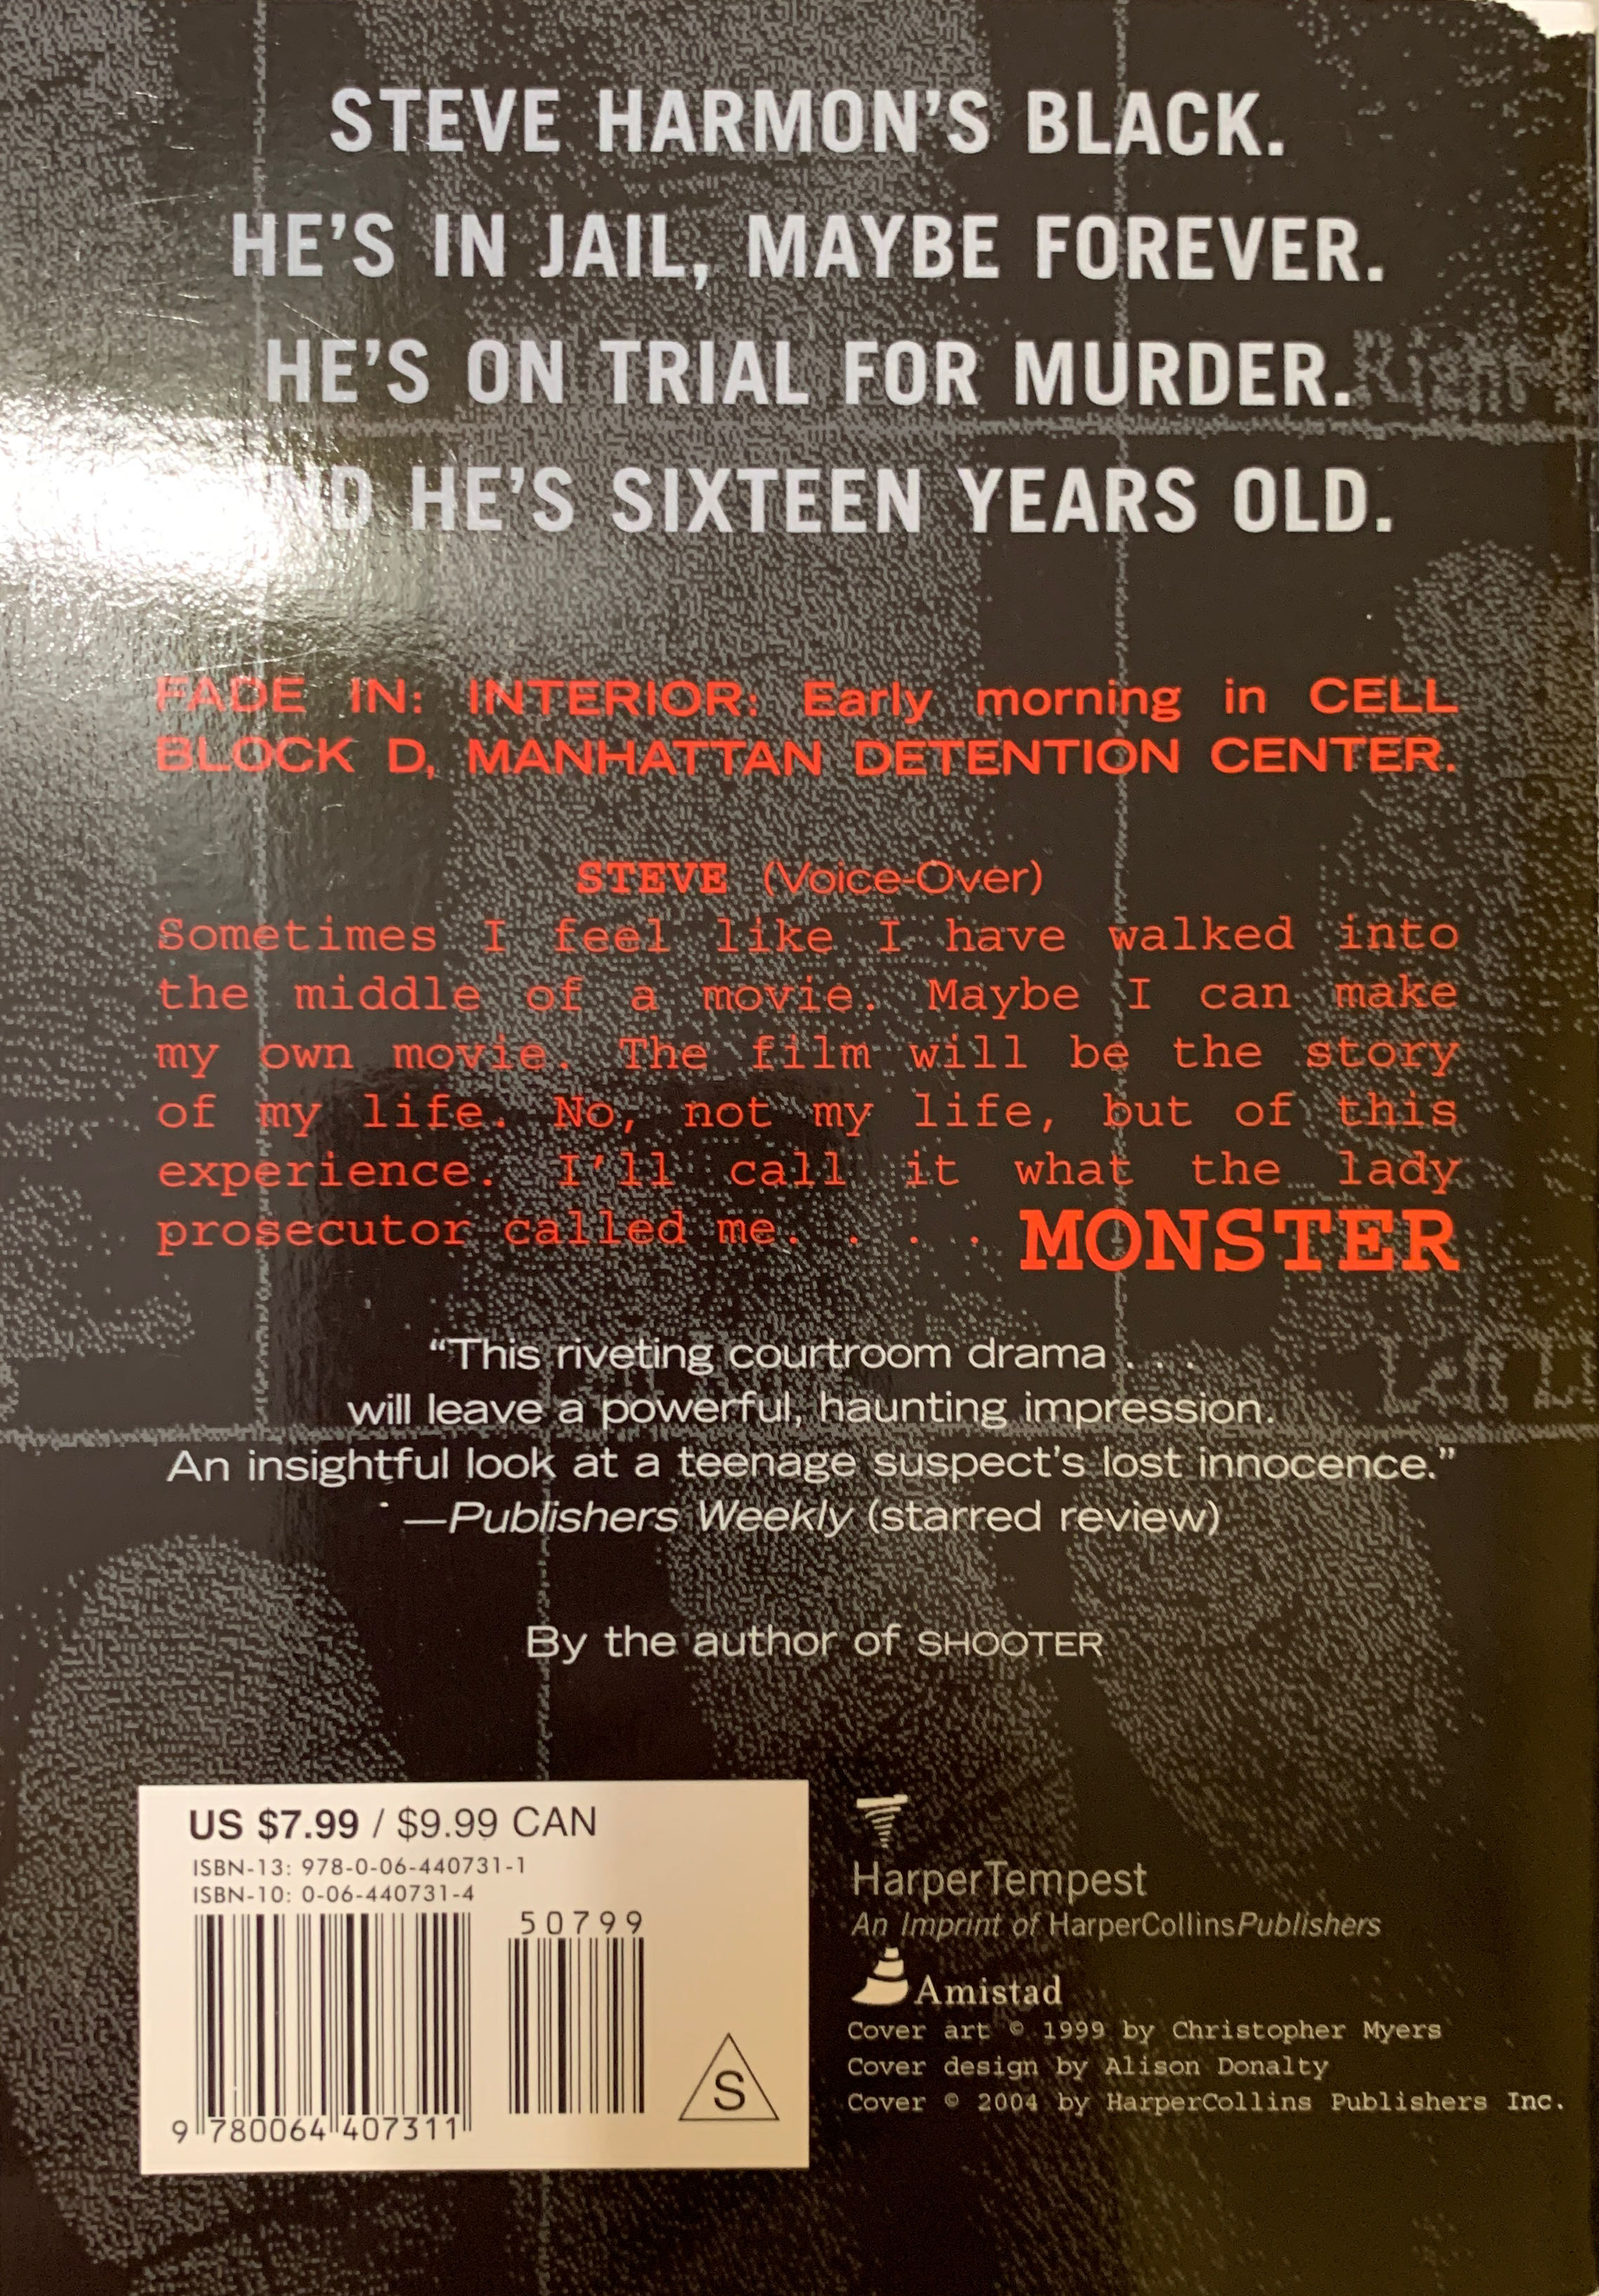 Monster - Frank Peretti (HarperCollins - Paperback) book collectible [Barcode 9780064407311] - Main Image 2